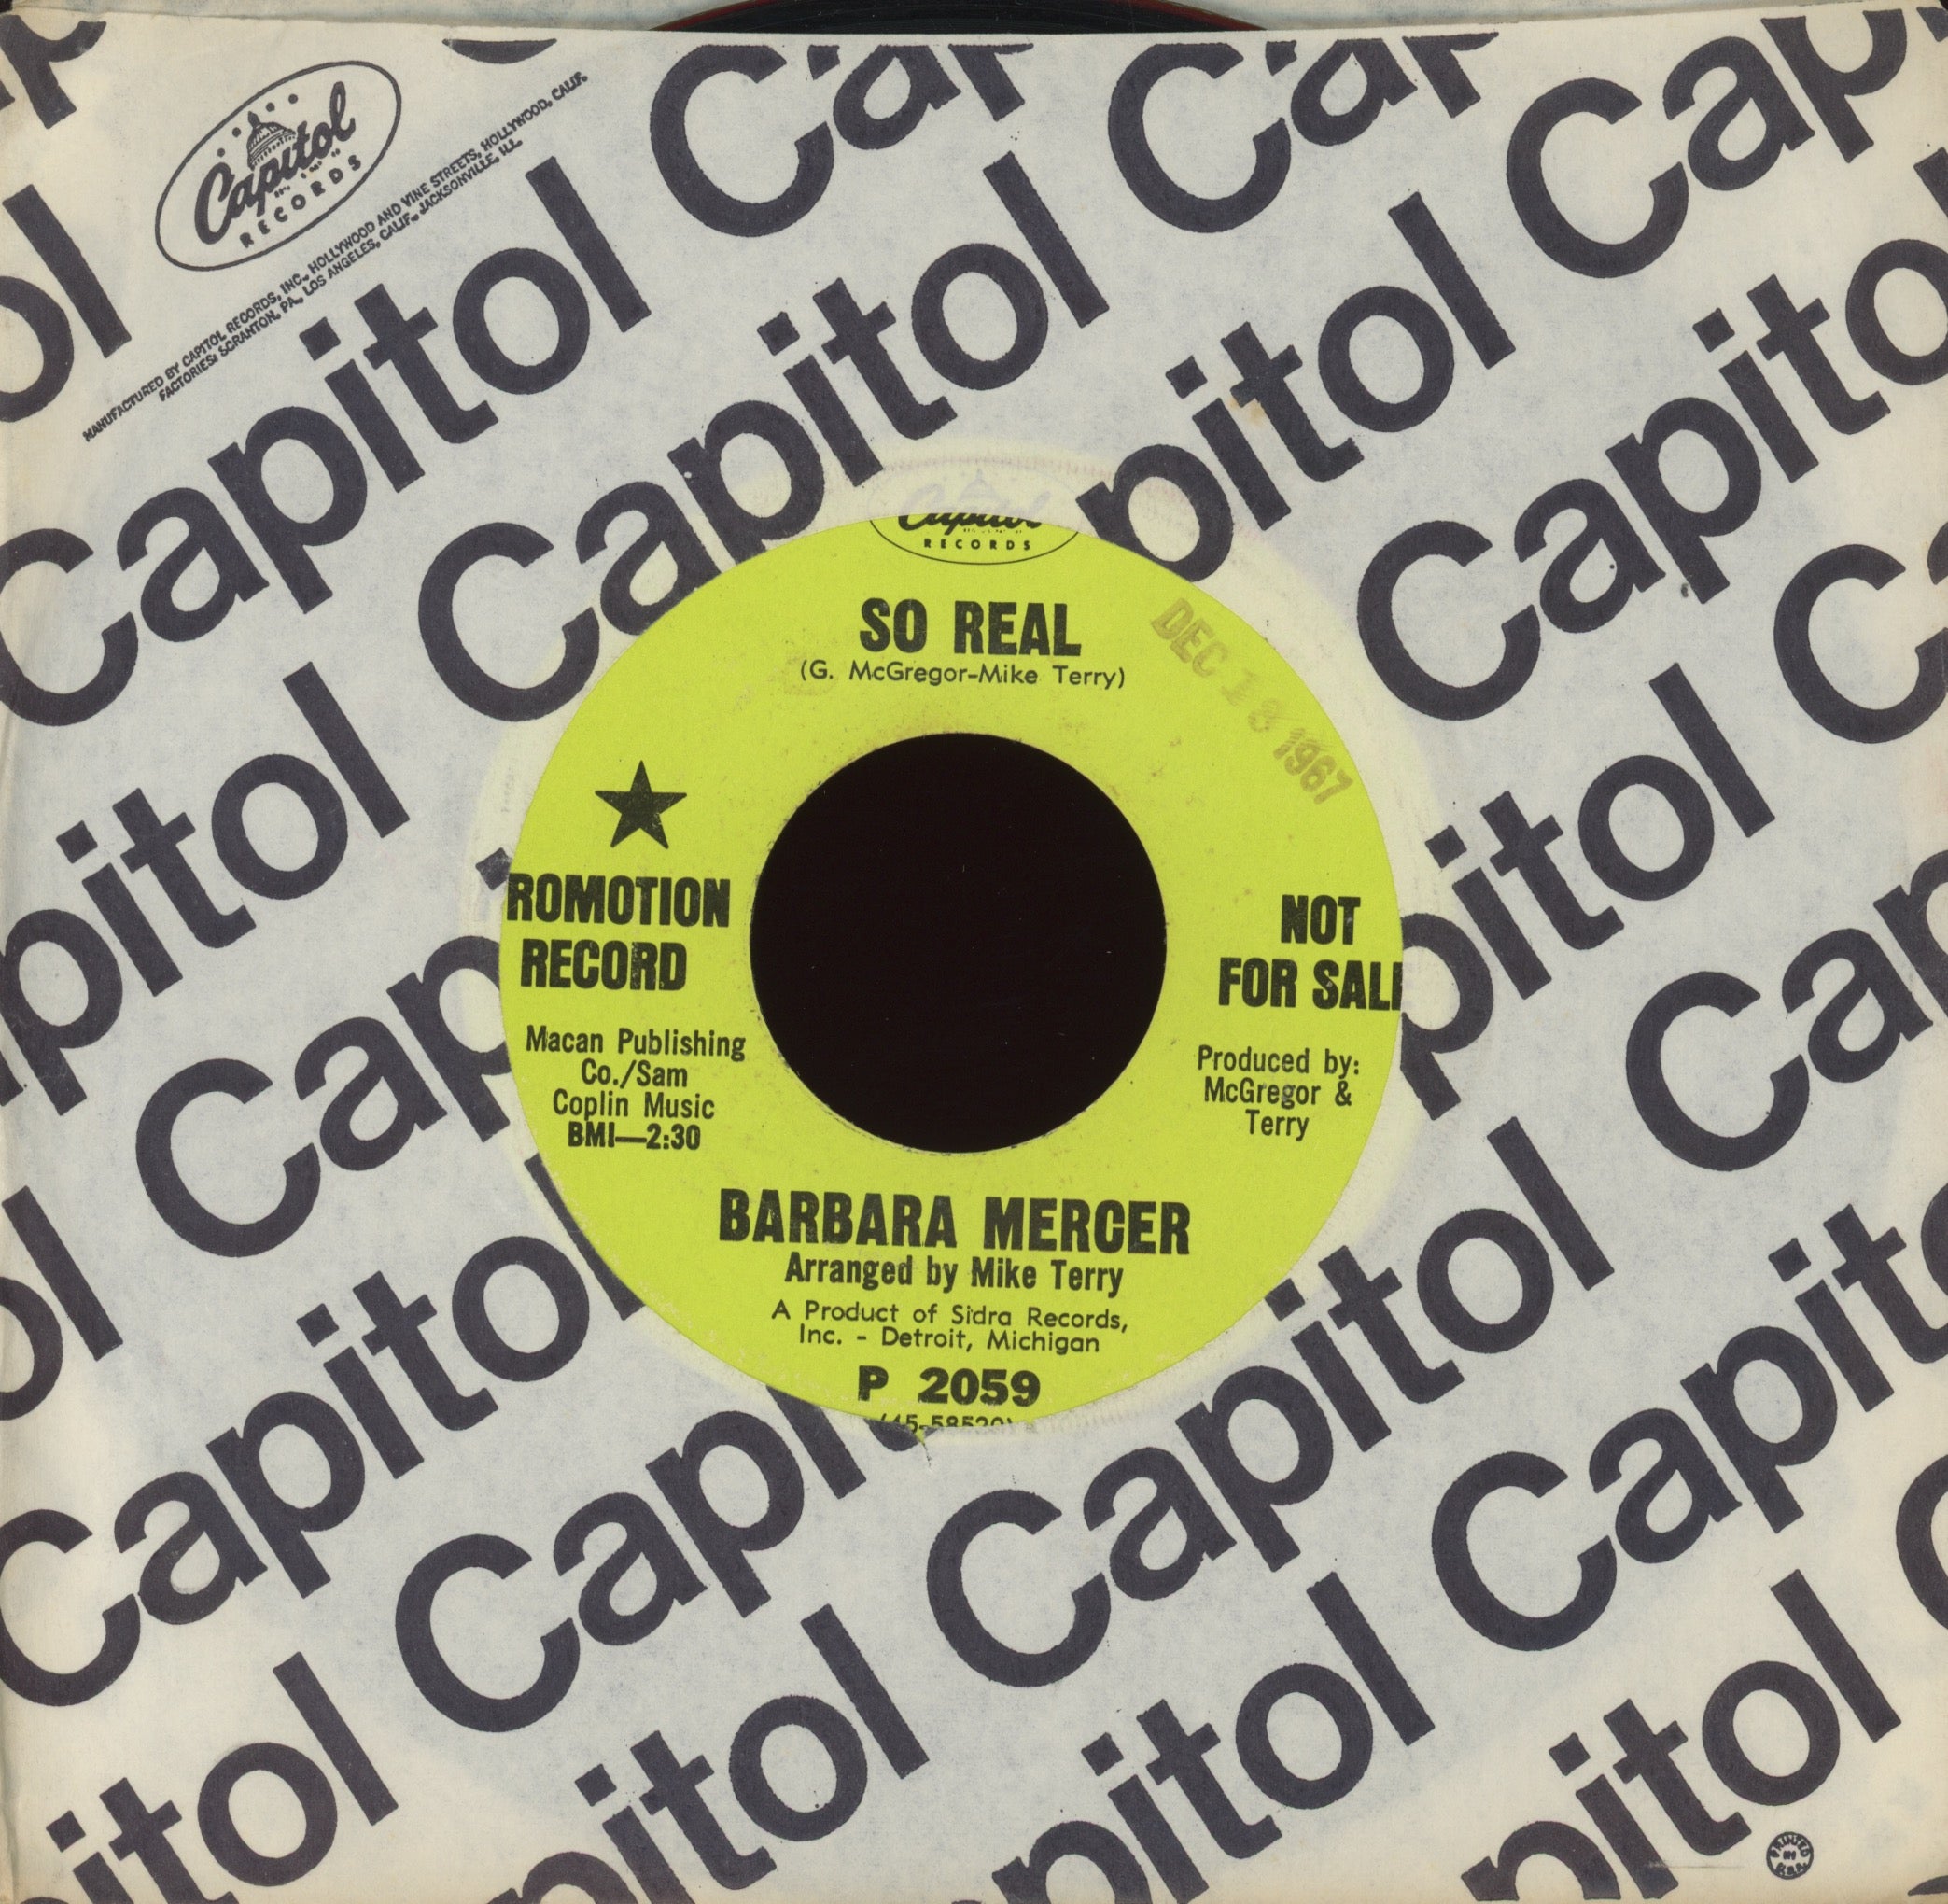 Barbara Mercer - So Real on Capitol Promo Northern Soul 45